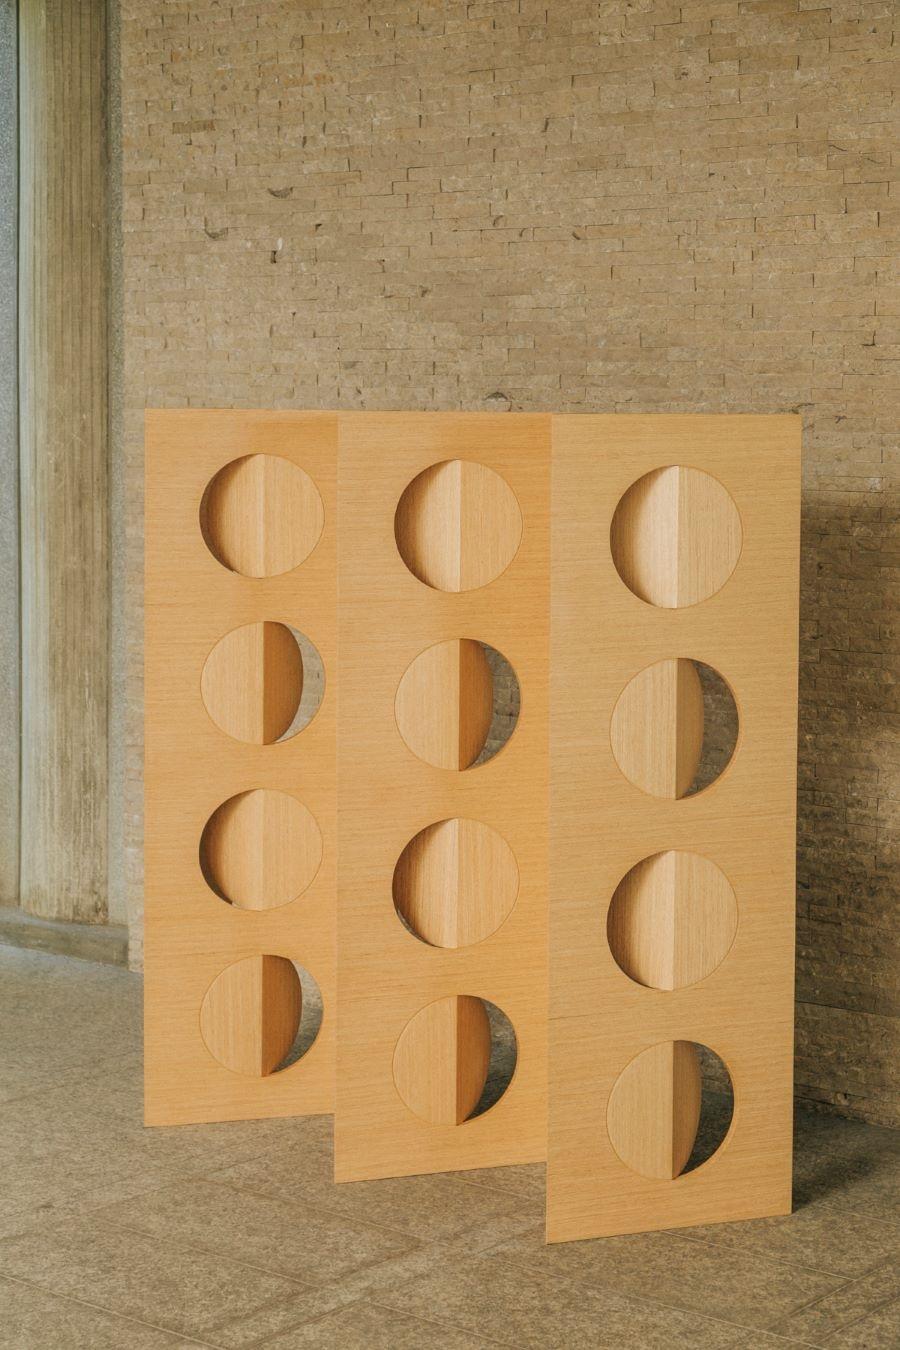 Oak wood moon divider
Baltic birch plywood with quarter cut white oak veneer
Designed by Ana Volante
Dimensions each pyramid
160cm x 50cm x 42cm ( each module but sold together as a set )
63